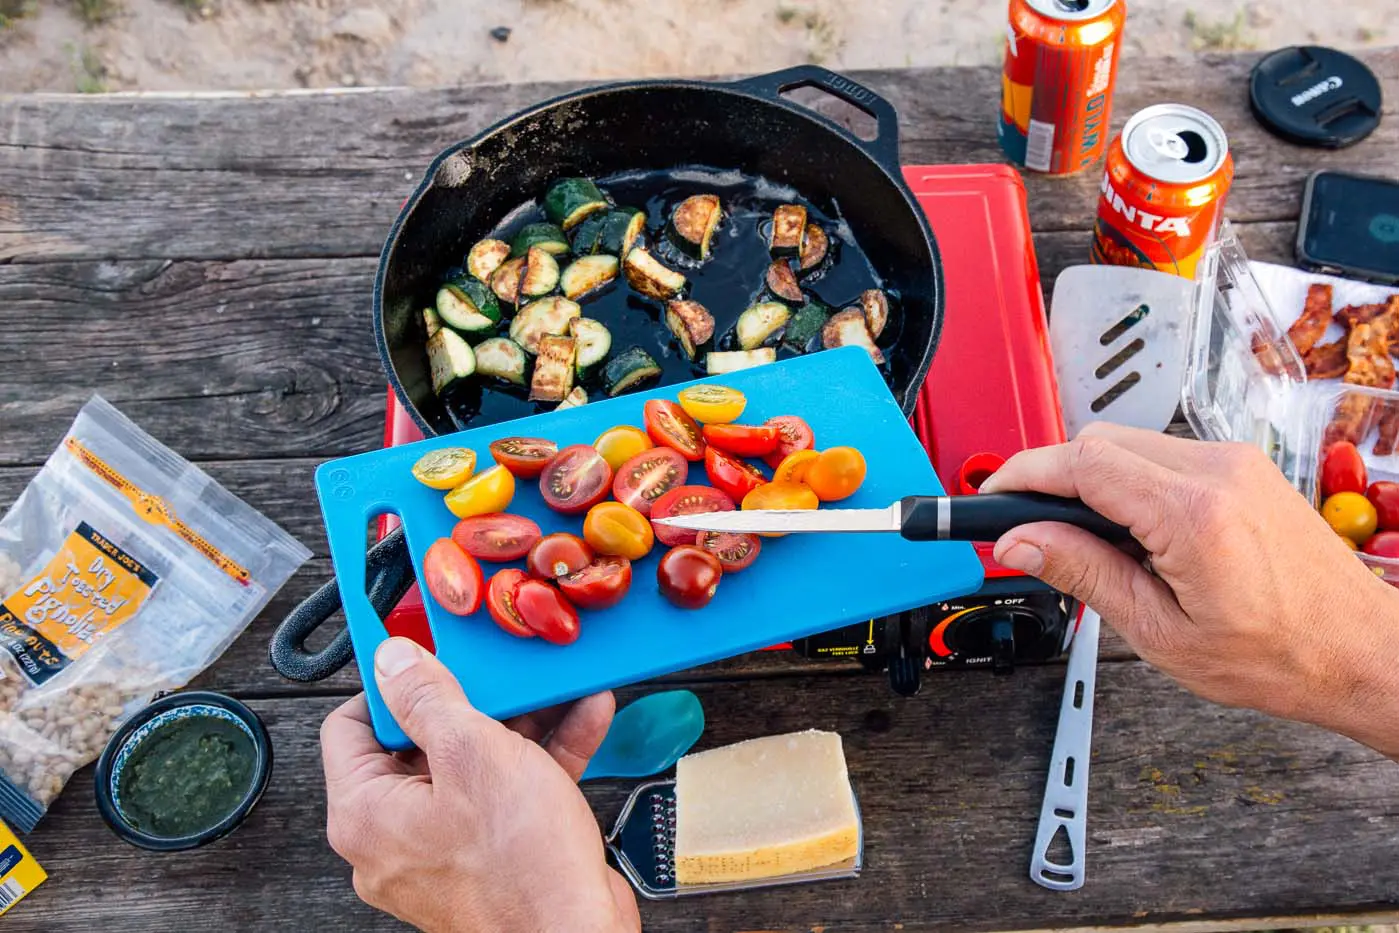 Man moving cut tomatoes from a cutting board into a cast iron skillet on a camping stove.